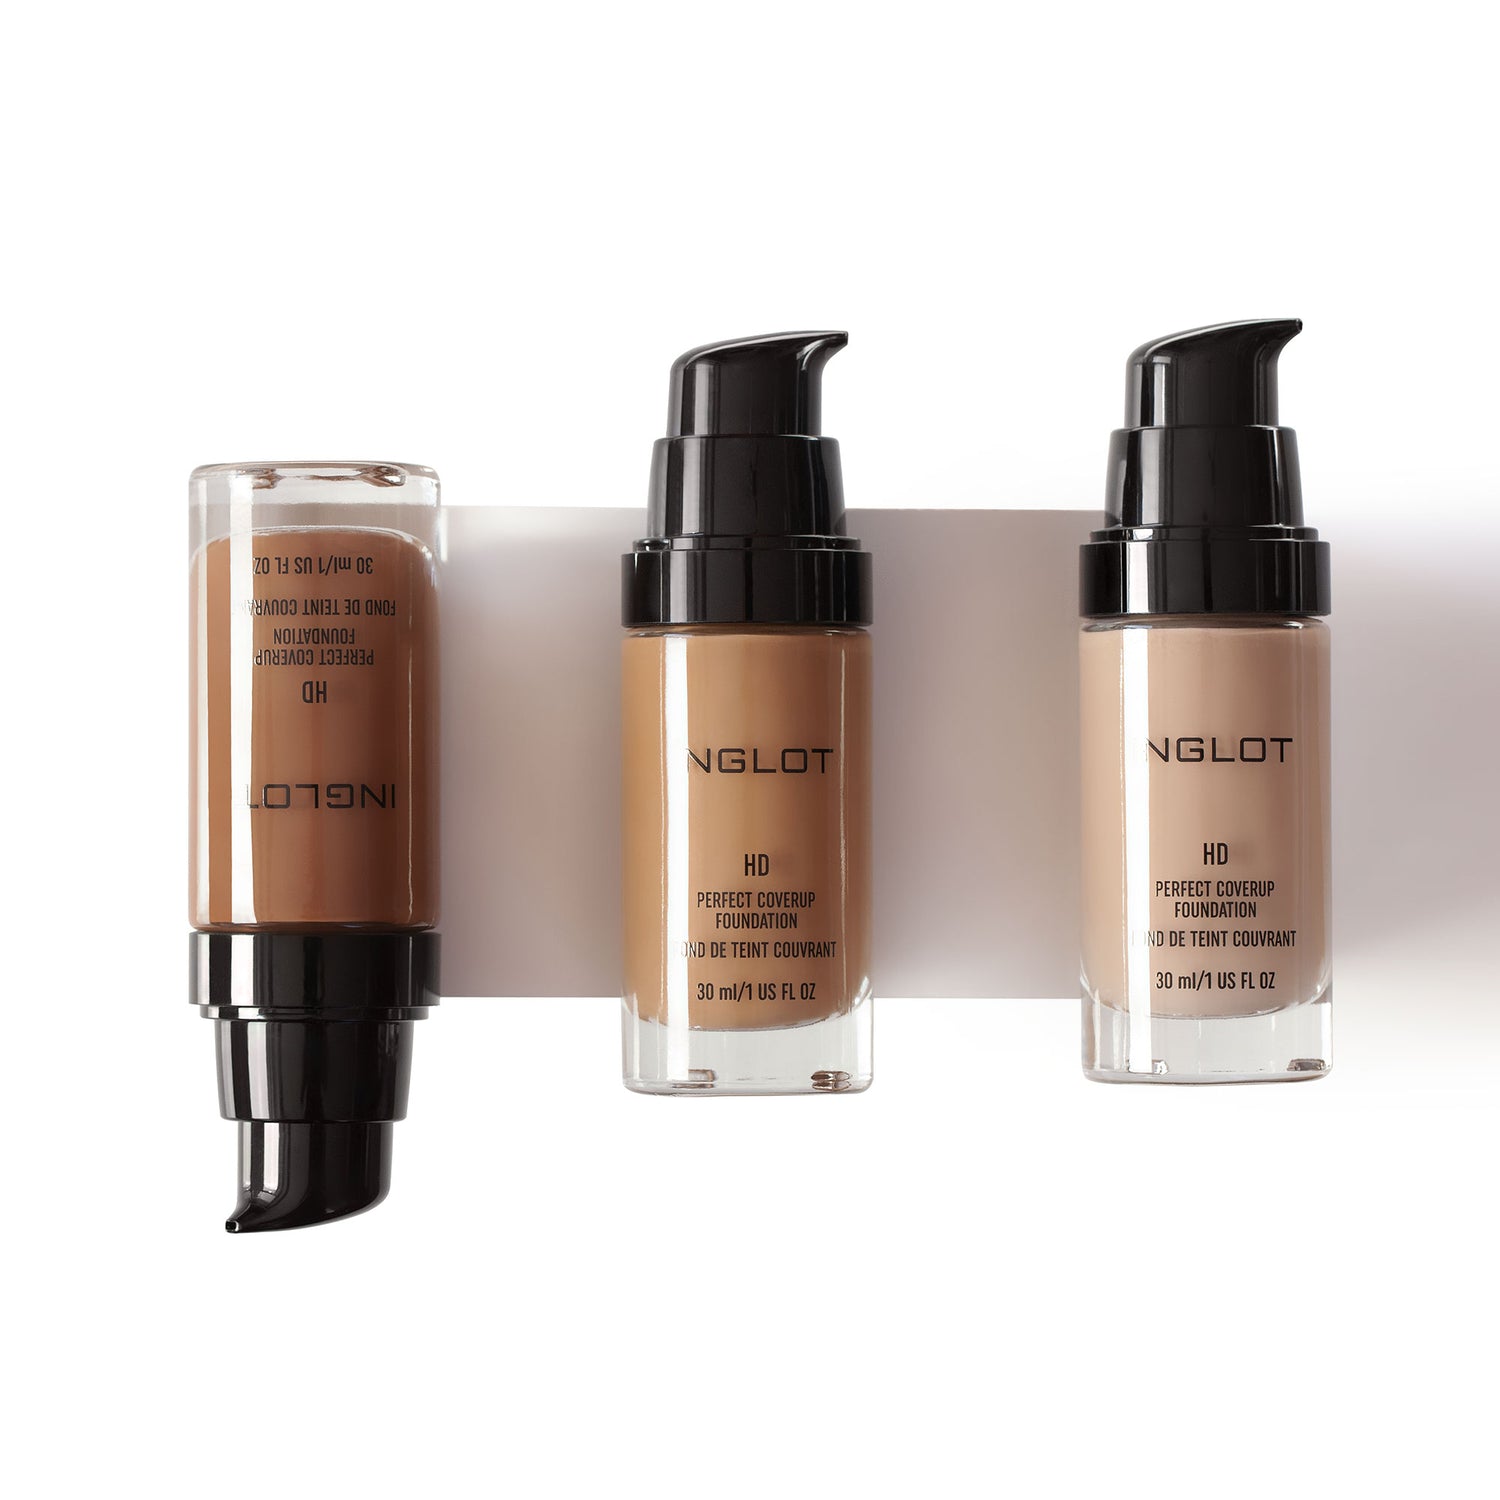 HD Perfect Coverup Foundation 83 - Inglot Cosmetics